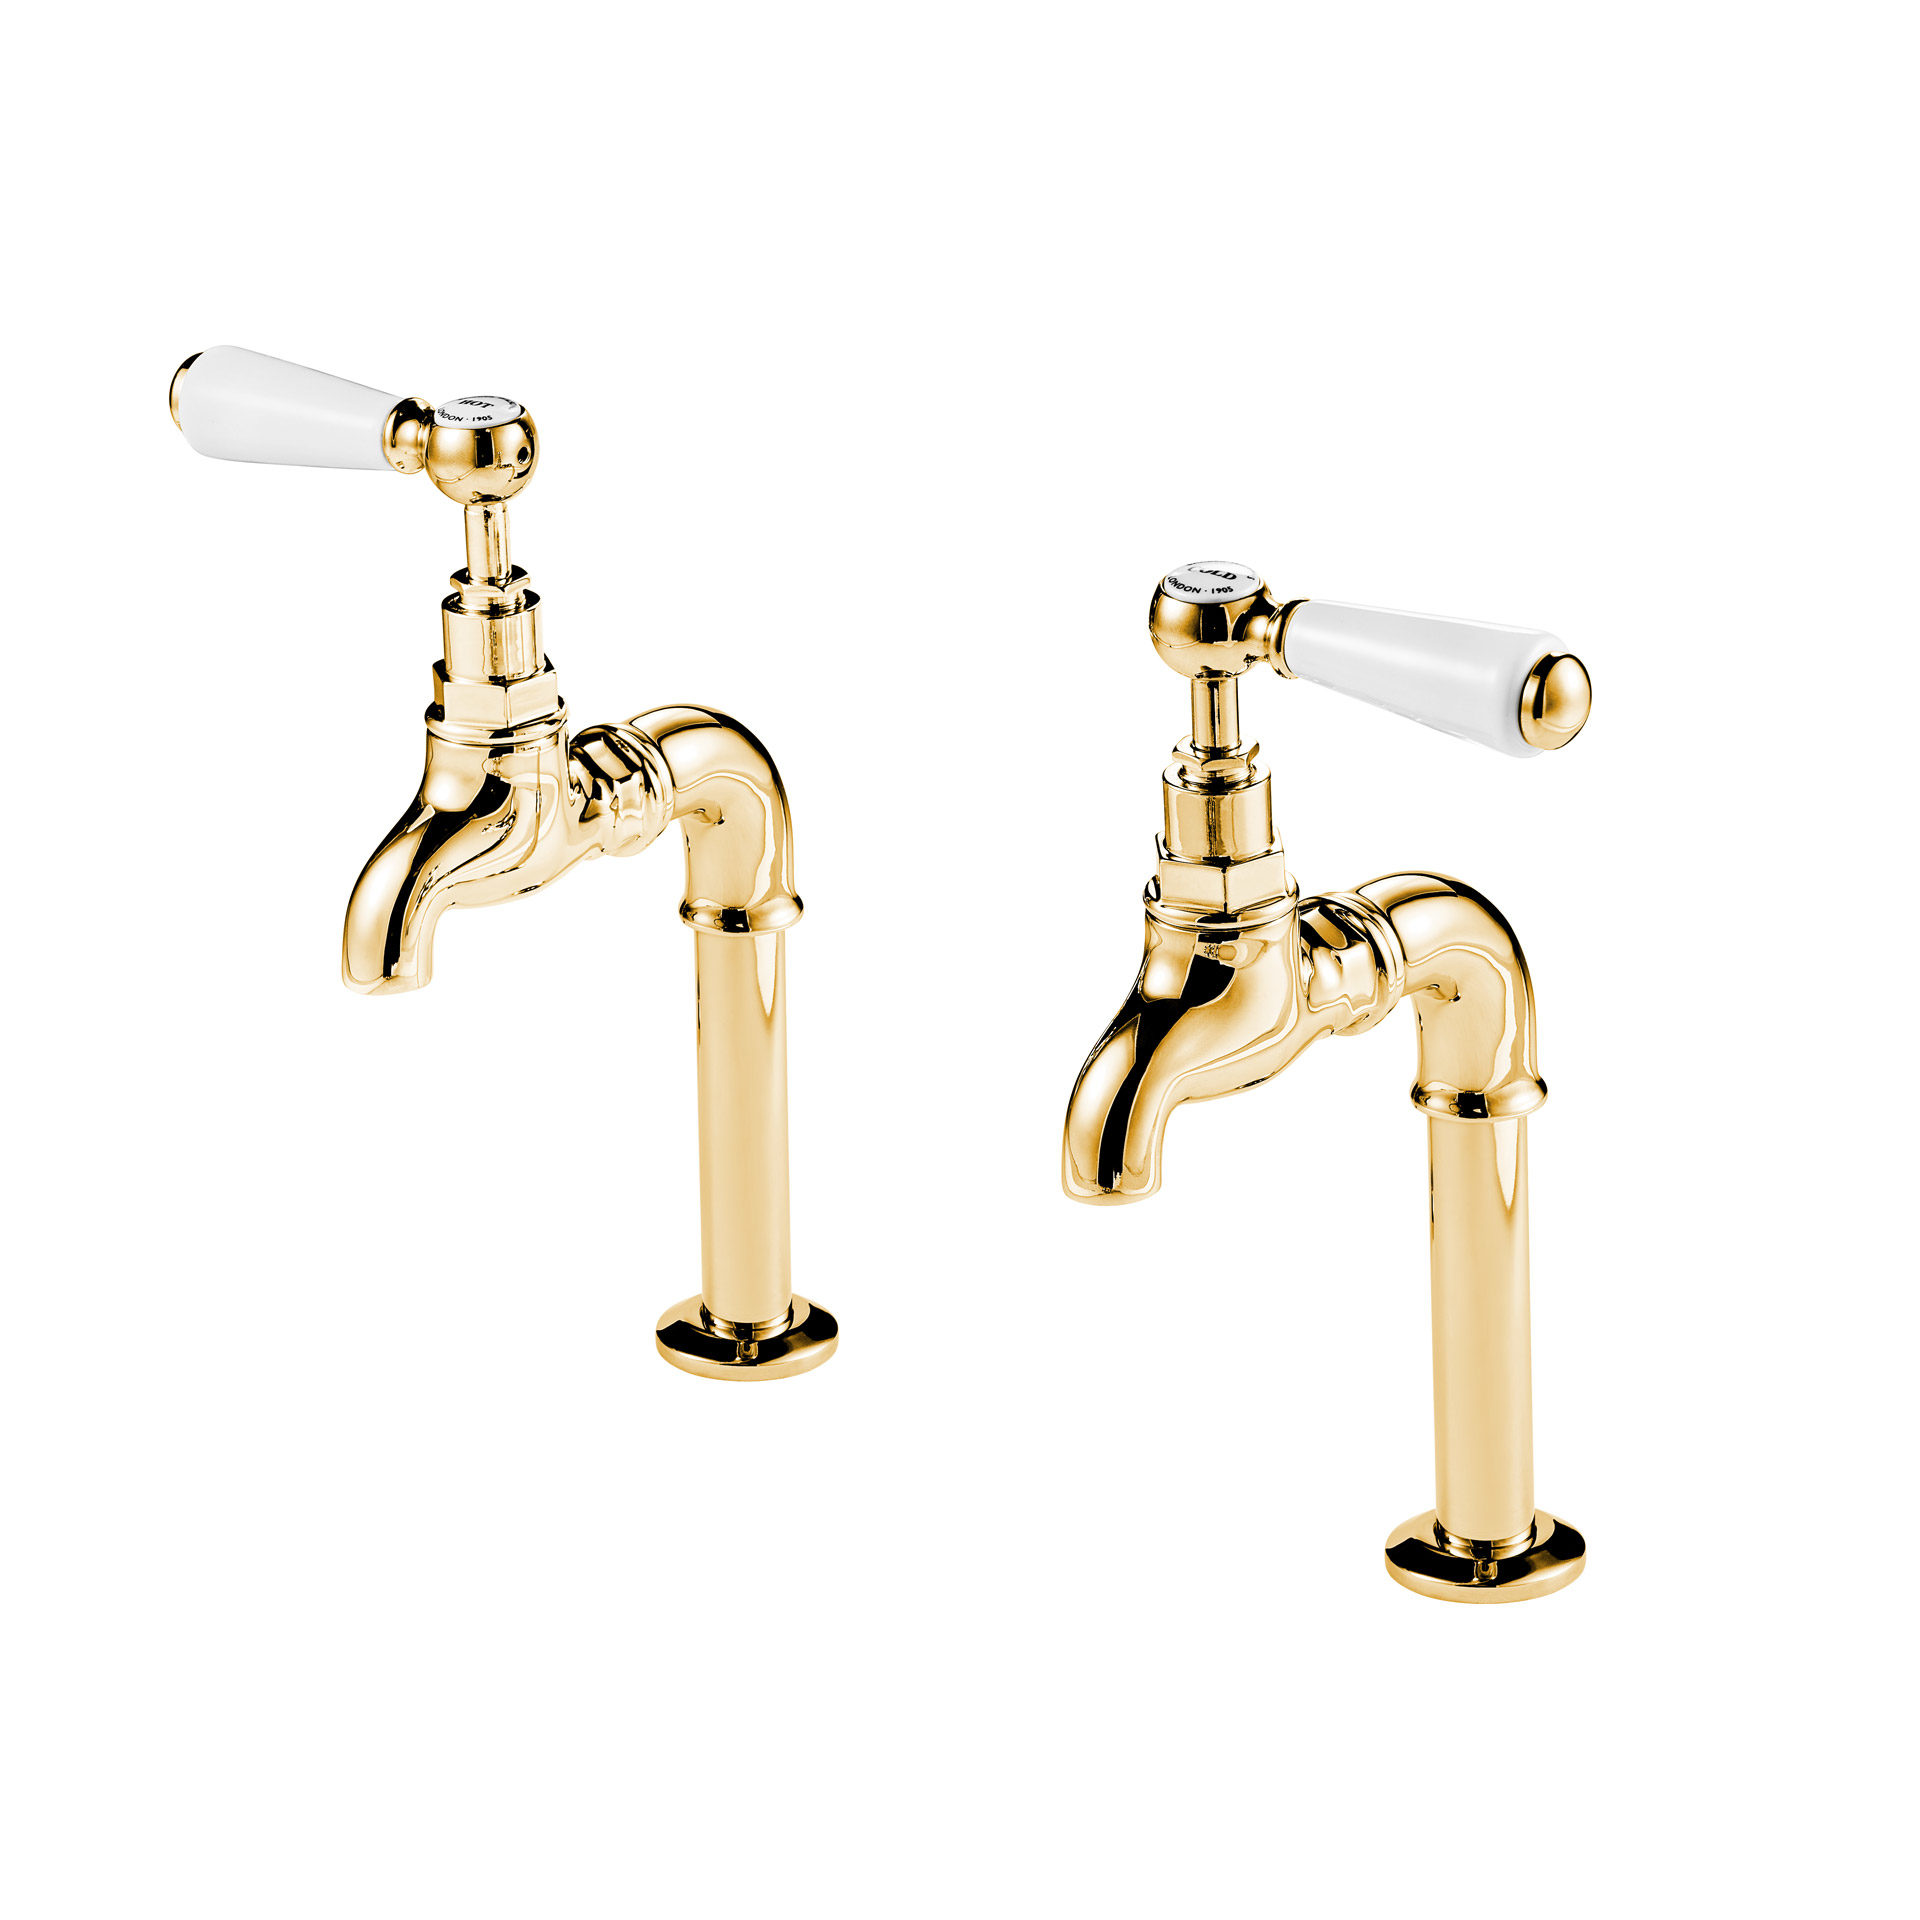 Barber Wilsons 6 Inch Deck Mounted Polished Brass Bib Taps with China Lever - Regent 260, 1890's Style